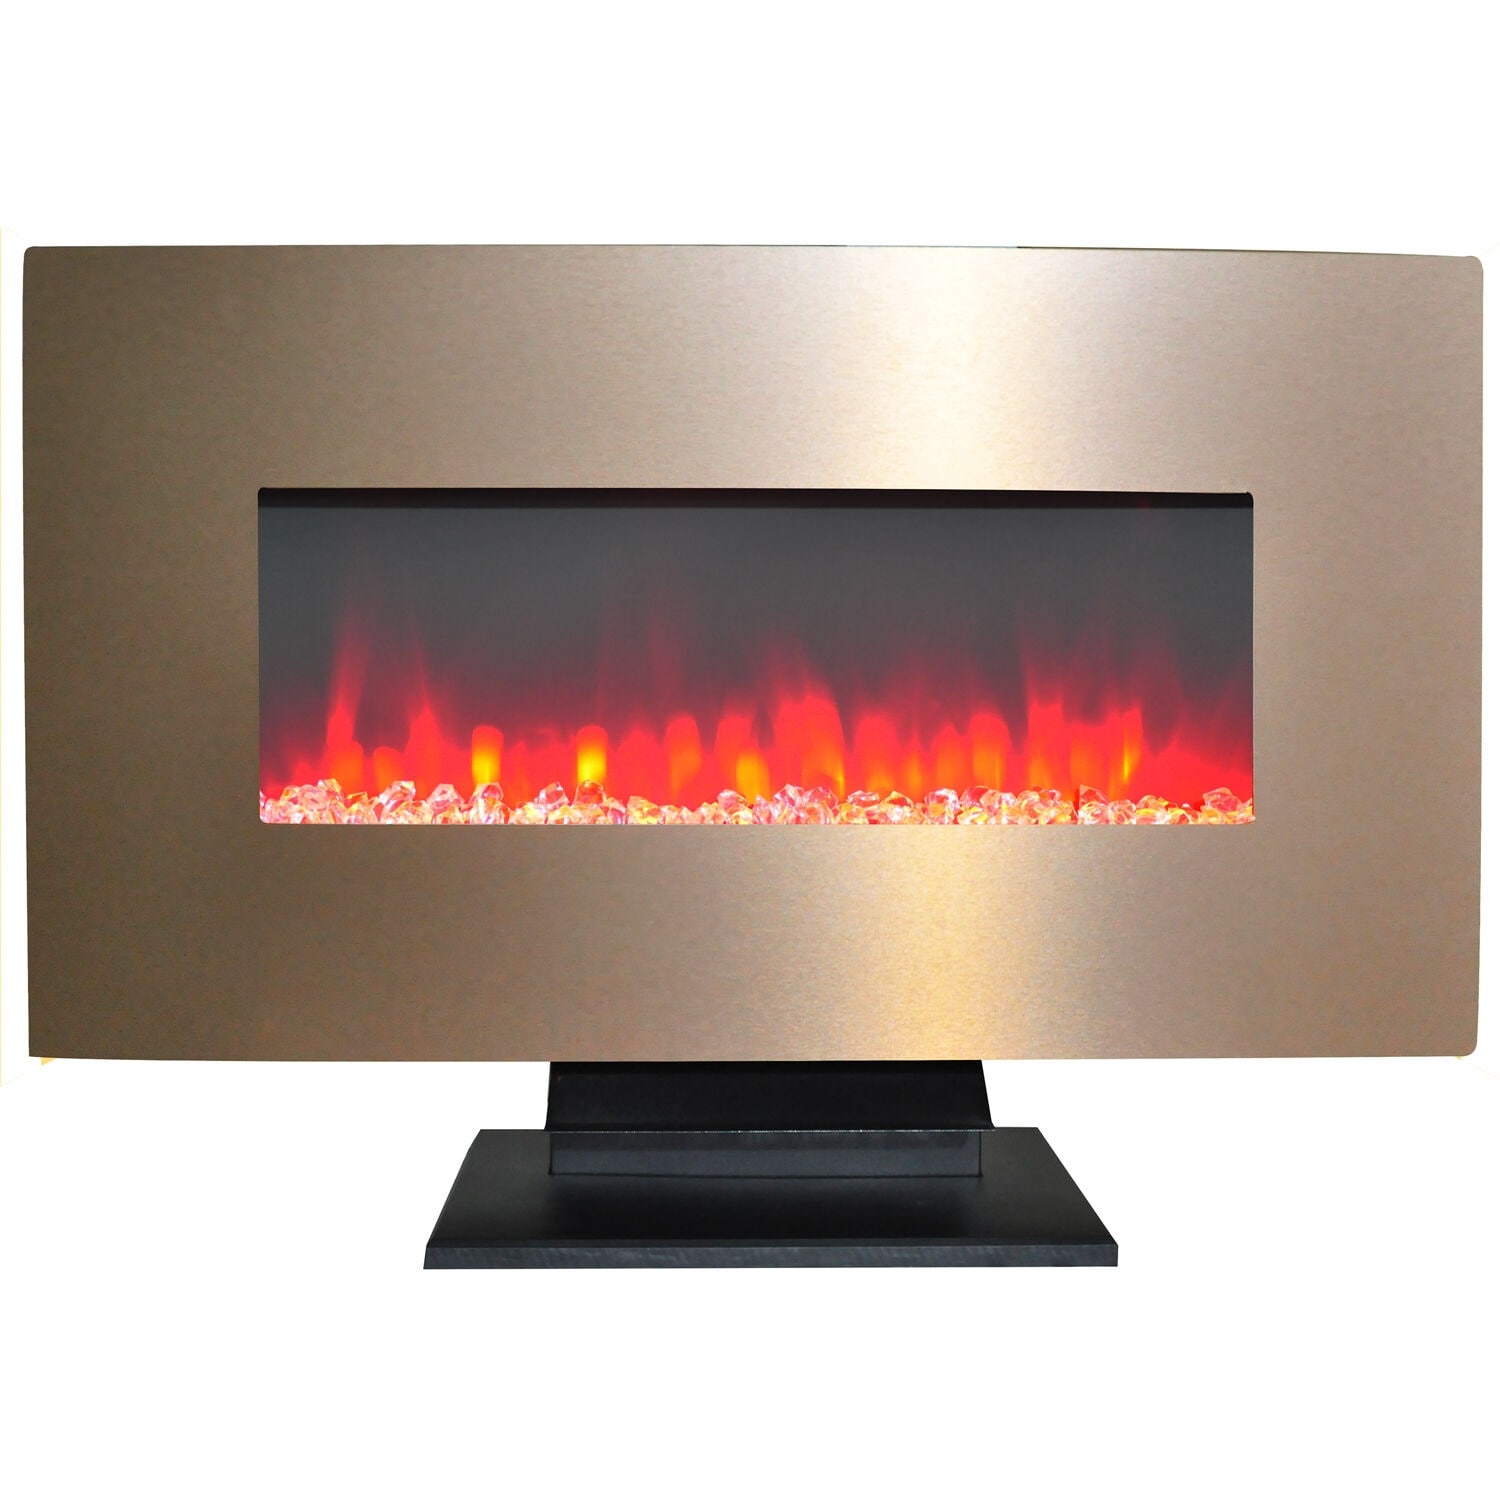 Hanover 36 In. Electric Fireplace with Multi-Color Crystal Rock Display and Metallic Bronze Frame